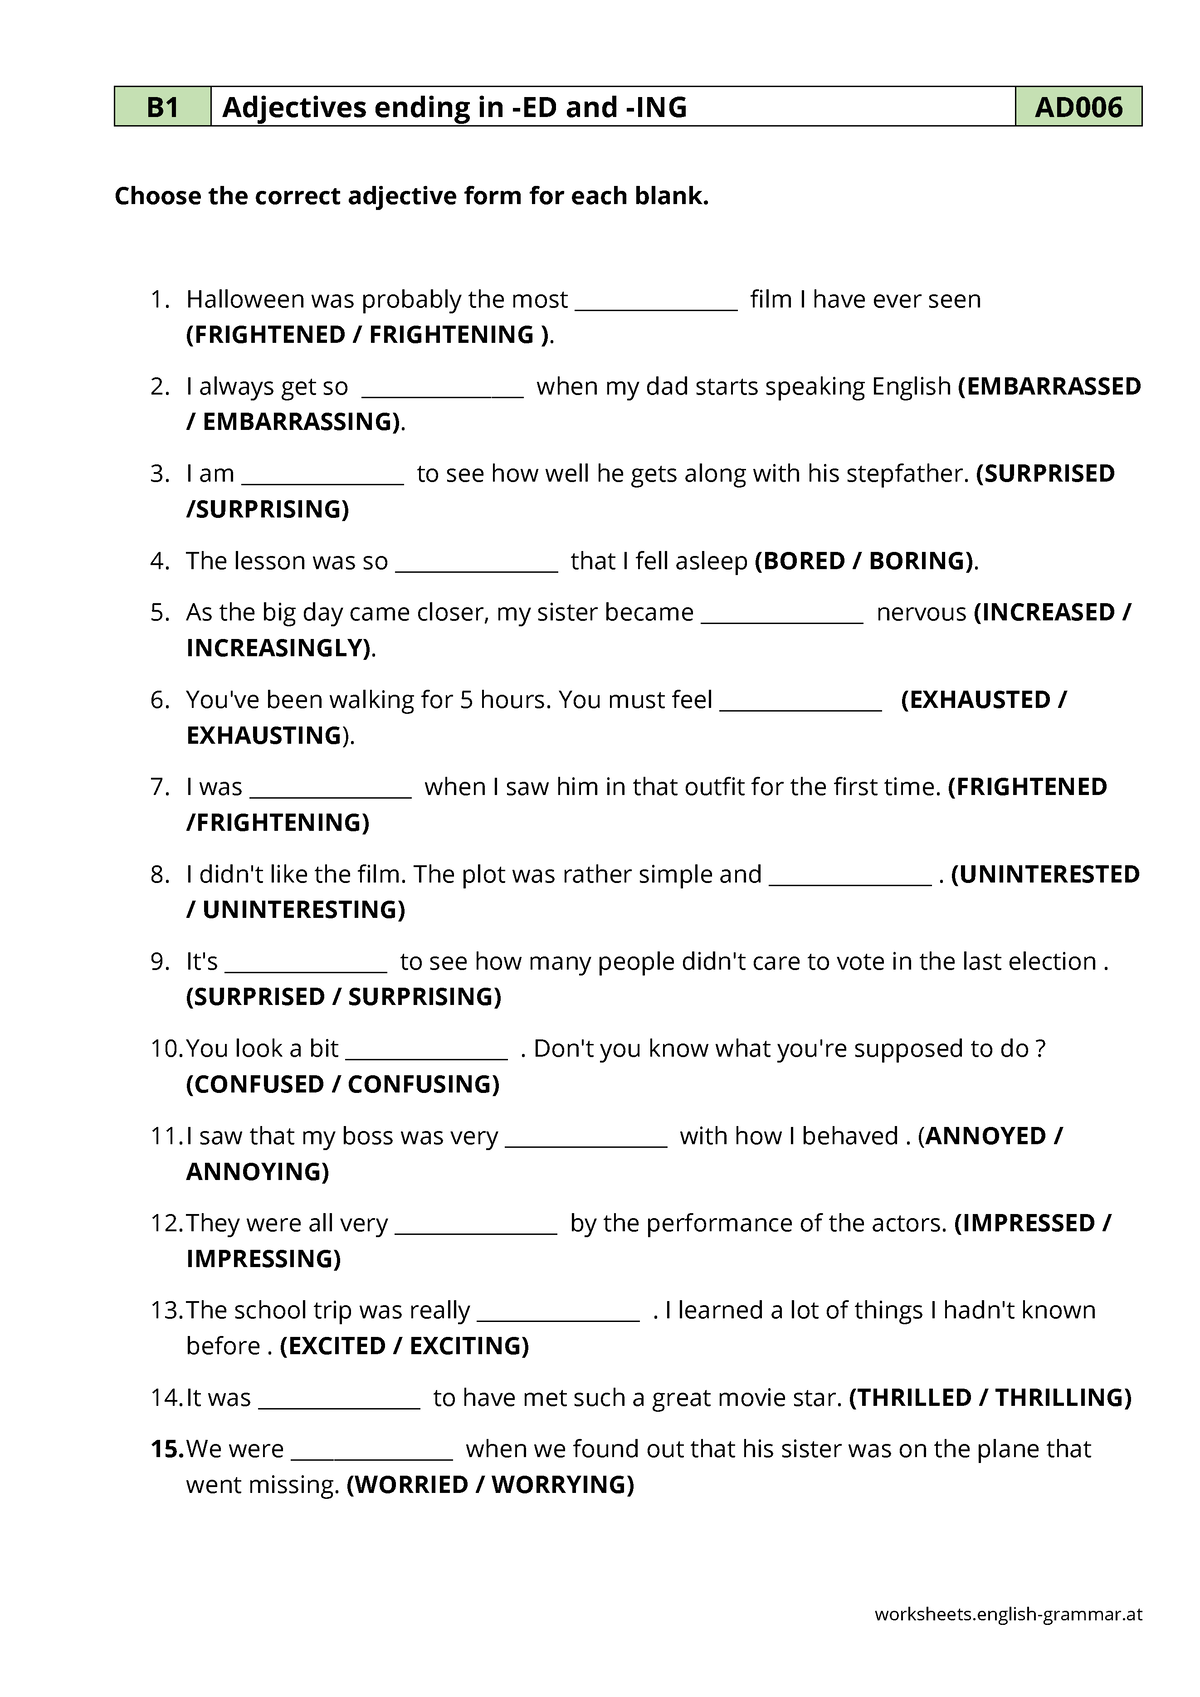 ad006-adjectives-ending-with-ed-and-ing-worksheets-english-grammar-b1-adjectives-ending-in-ed